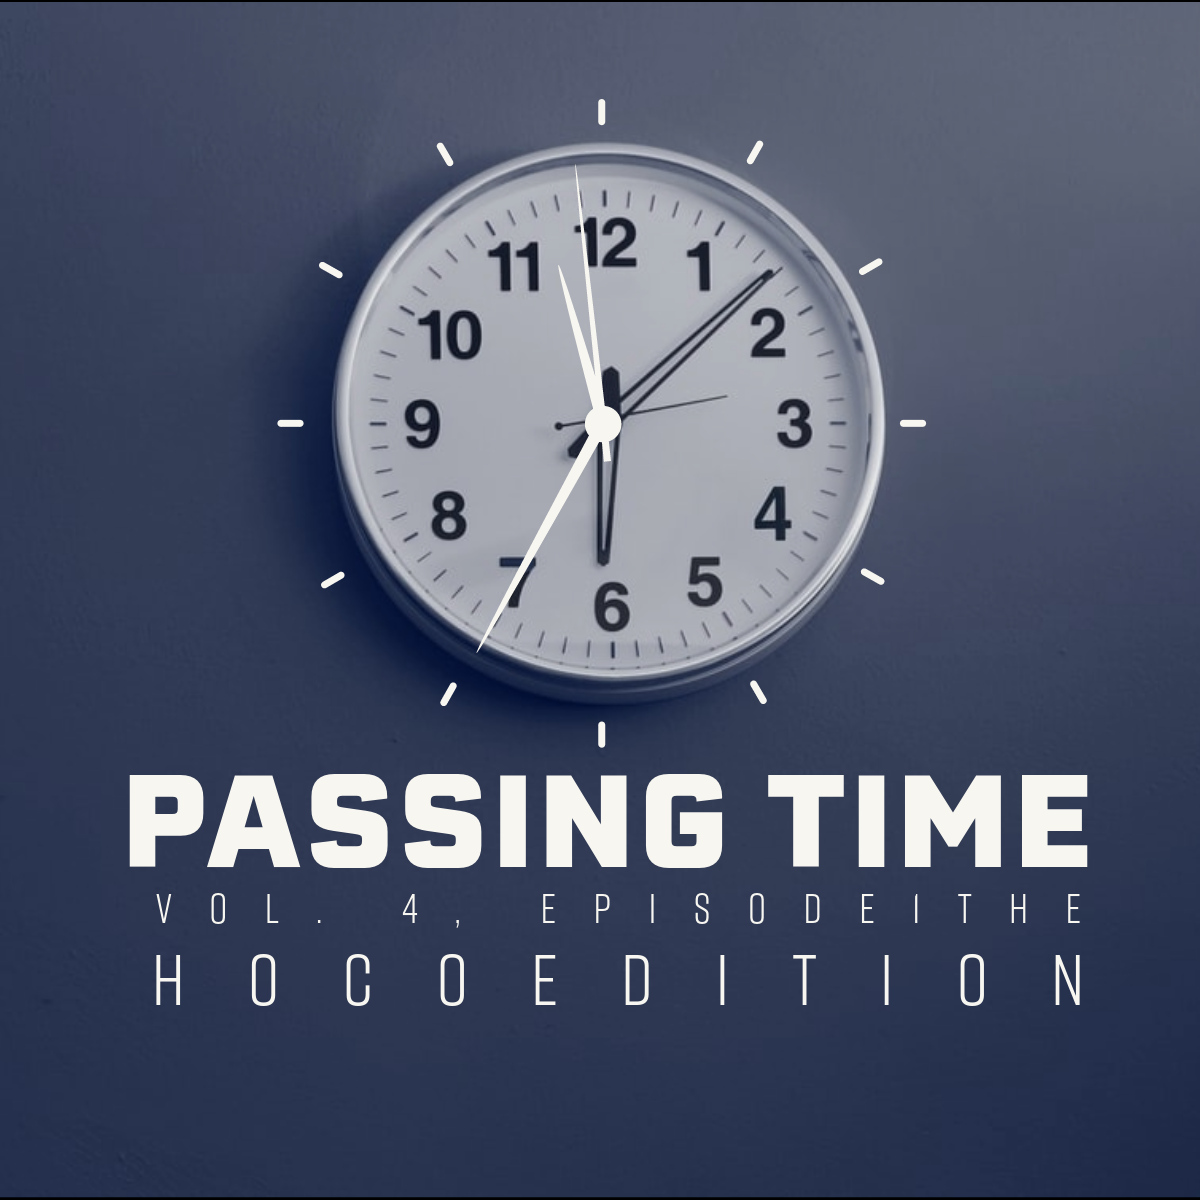 Passing Time: Vol. 4, Episode 1